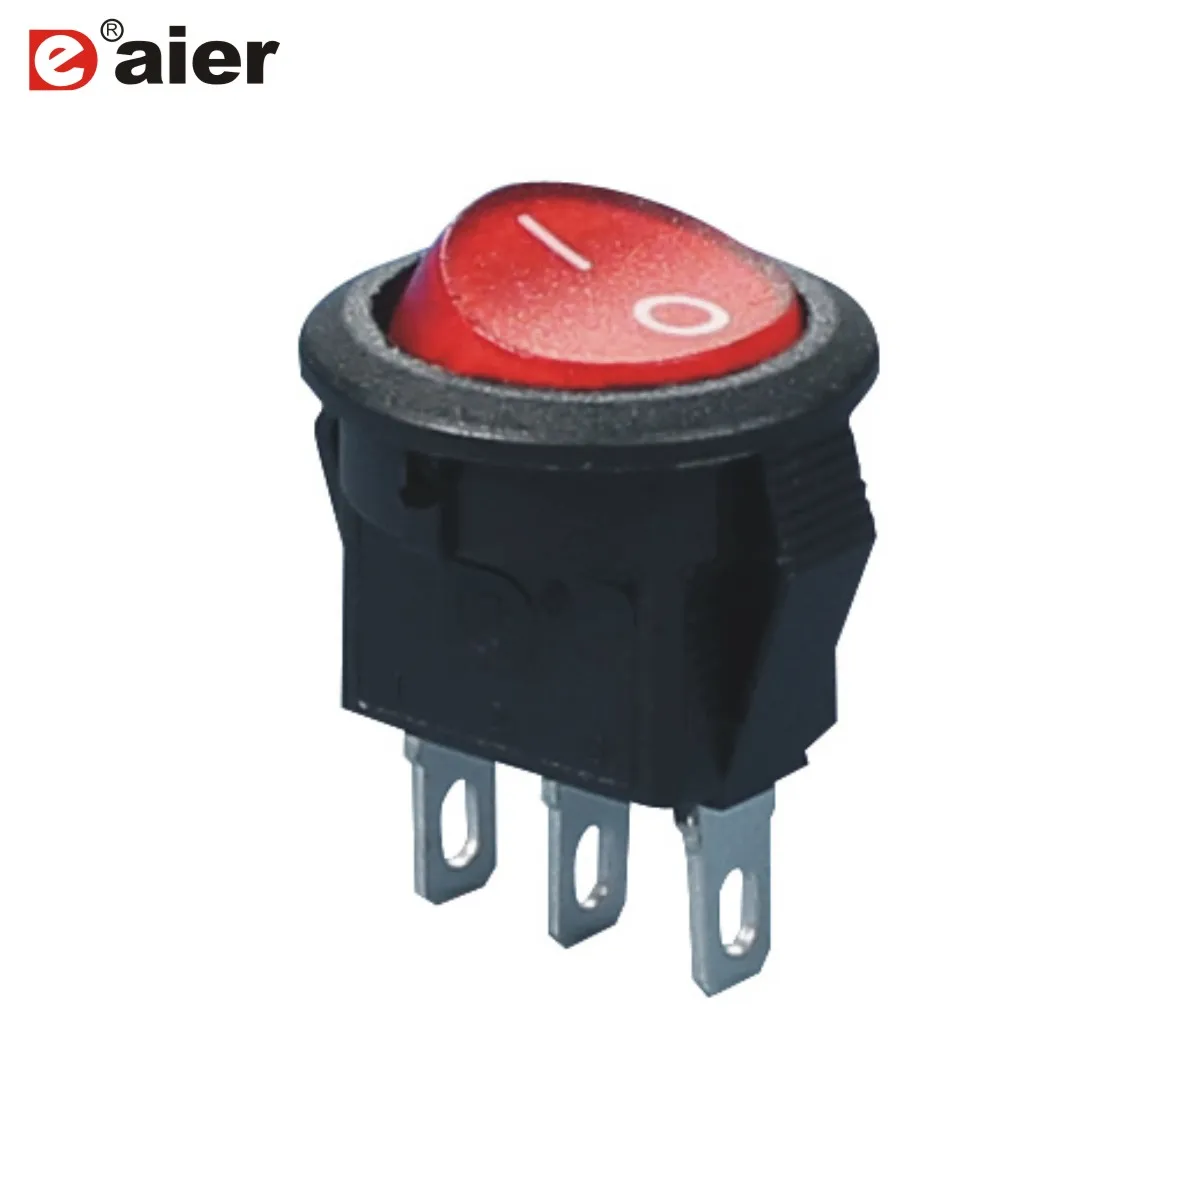 

Mini Round Shape 3 Pins Rocker Switch ON/OFF SPST 3A 250VAC Single Pole 6A 125VAC Switches 2 Position With Solder Terminal